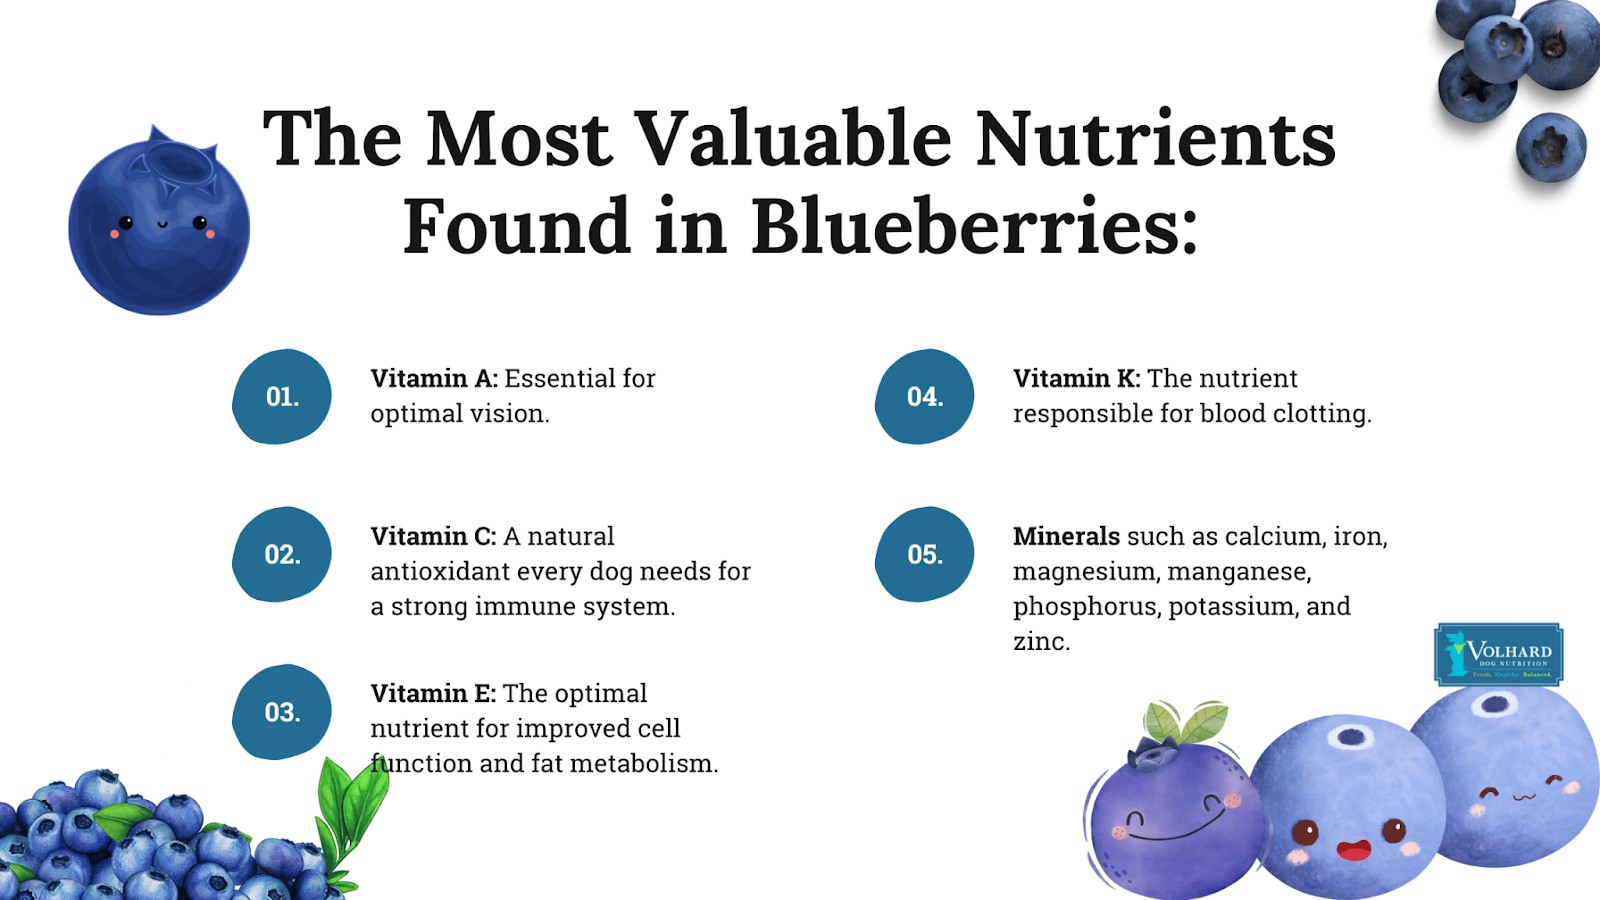 The most valuable nutrients found in blueberries